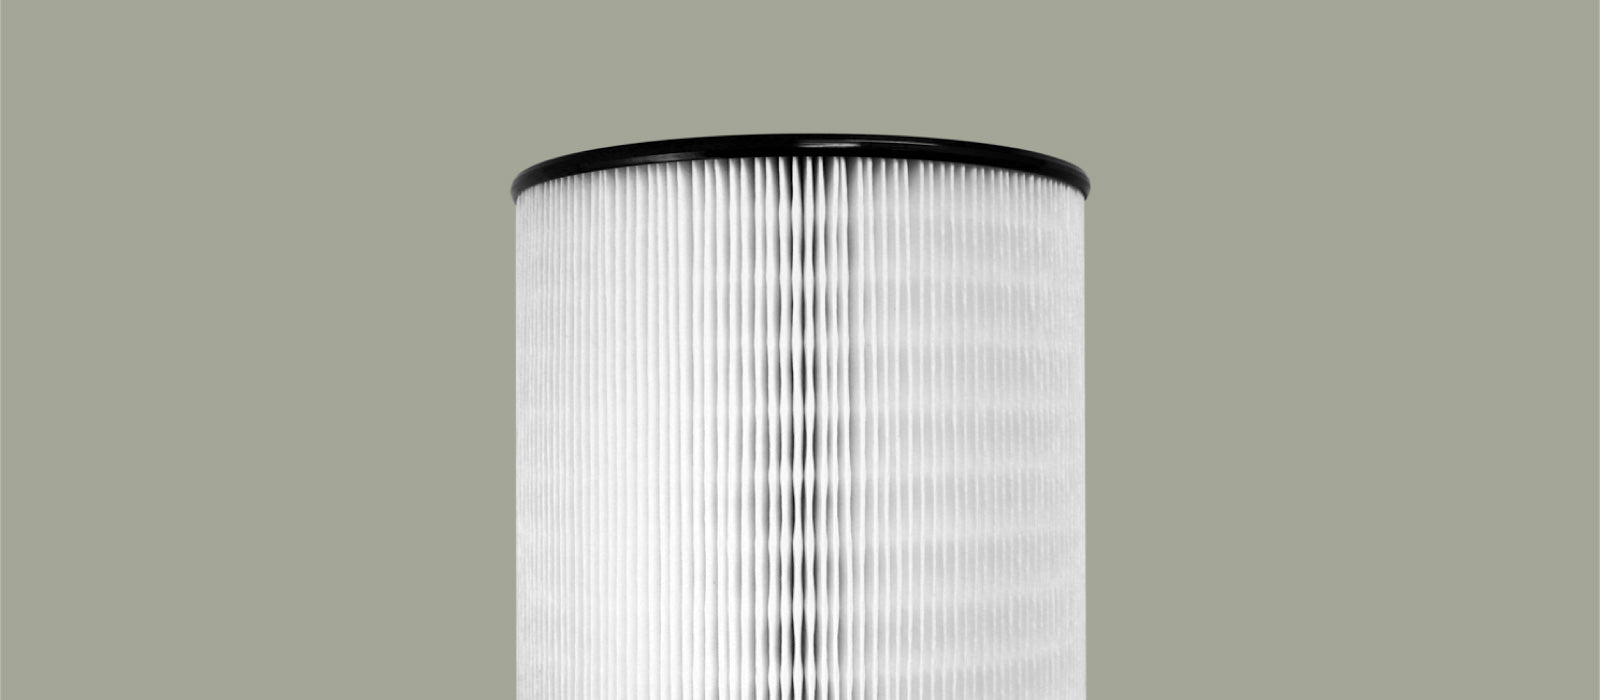 Pros and Cons of HEPA Filter Air Purifiers, Dissected - Molekule